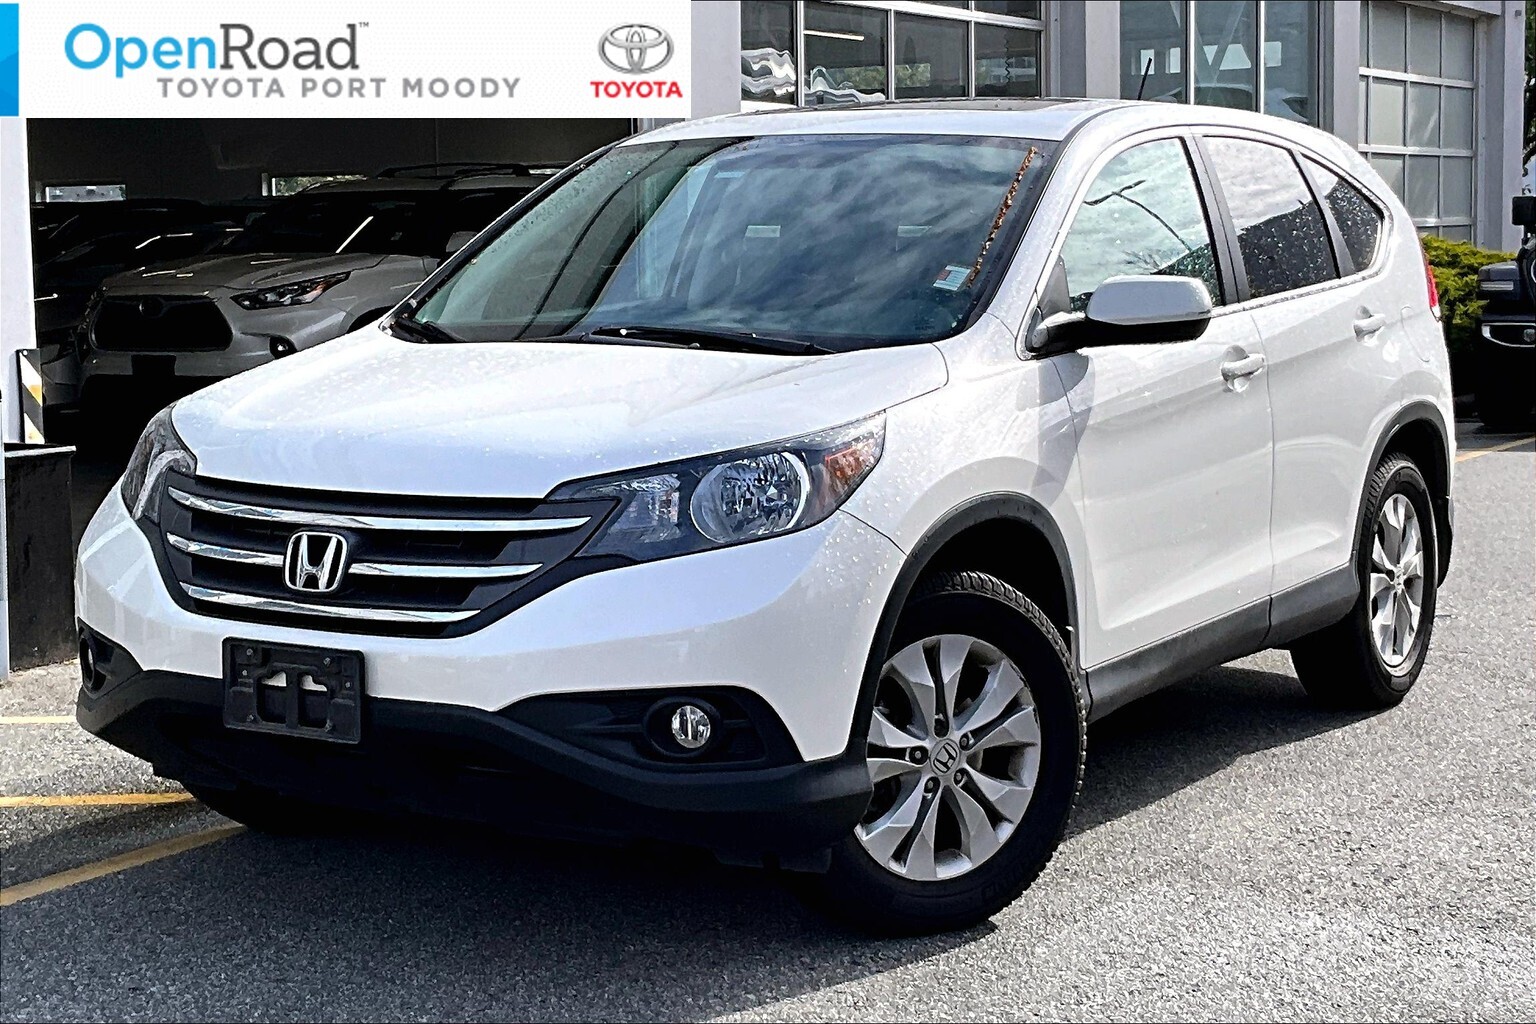 2014 Honda CR-V EX AWD |OpenRoad True Price |Local |One Owner |No 